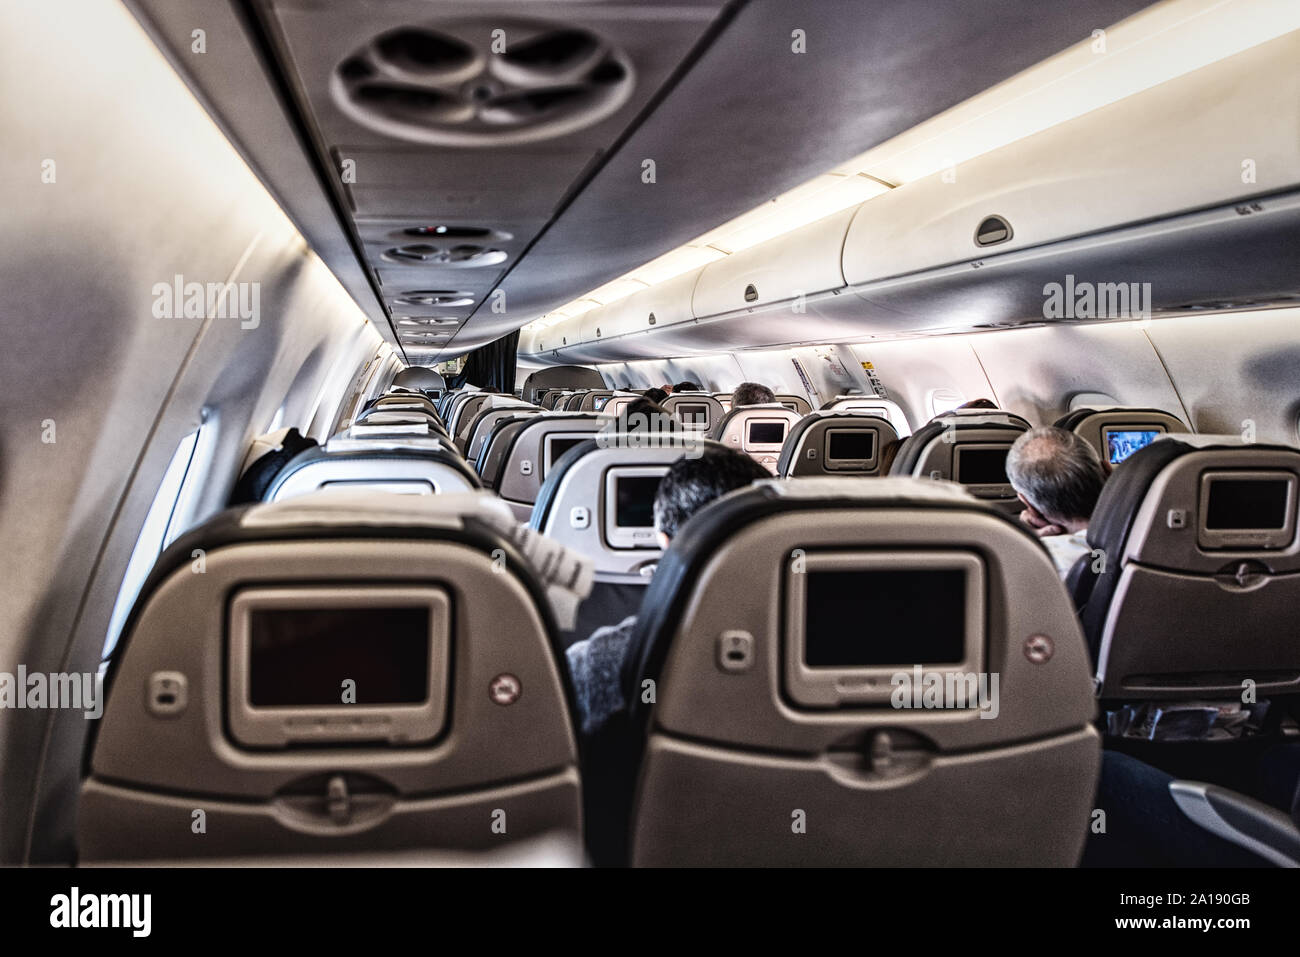 Aircraft cabin, seats with screens. Stock Photo